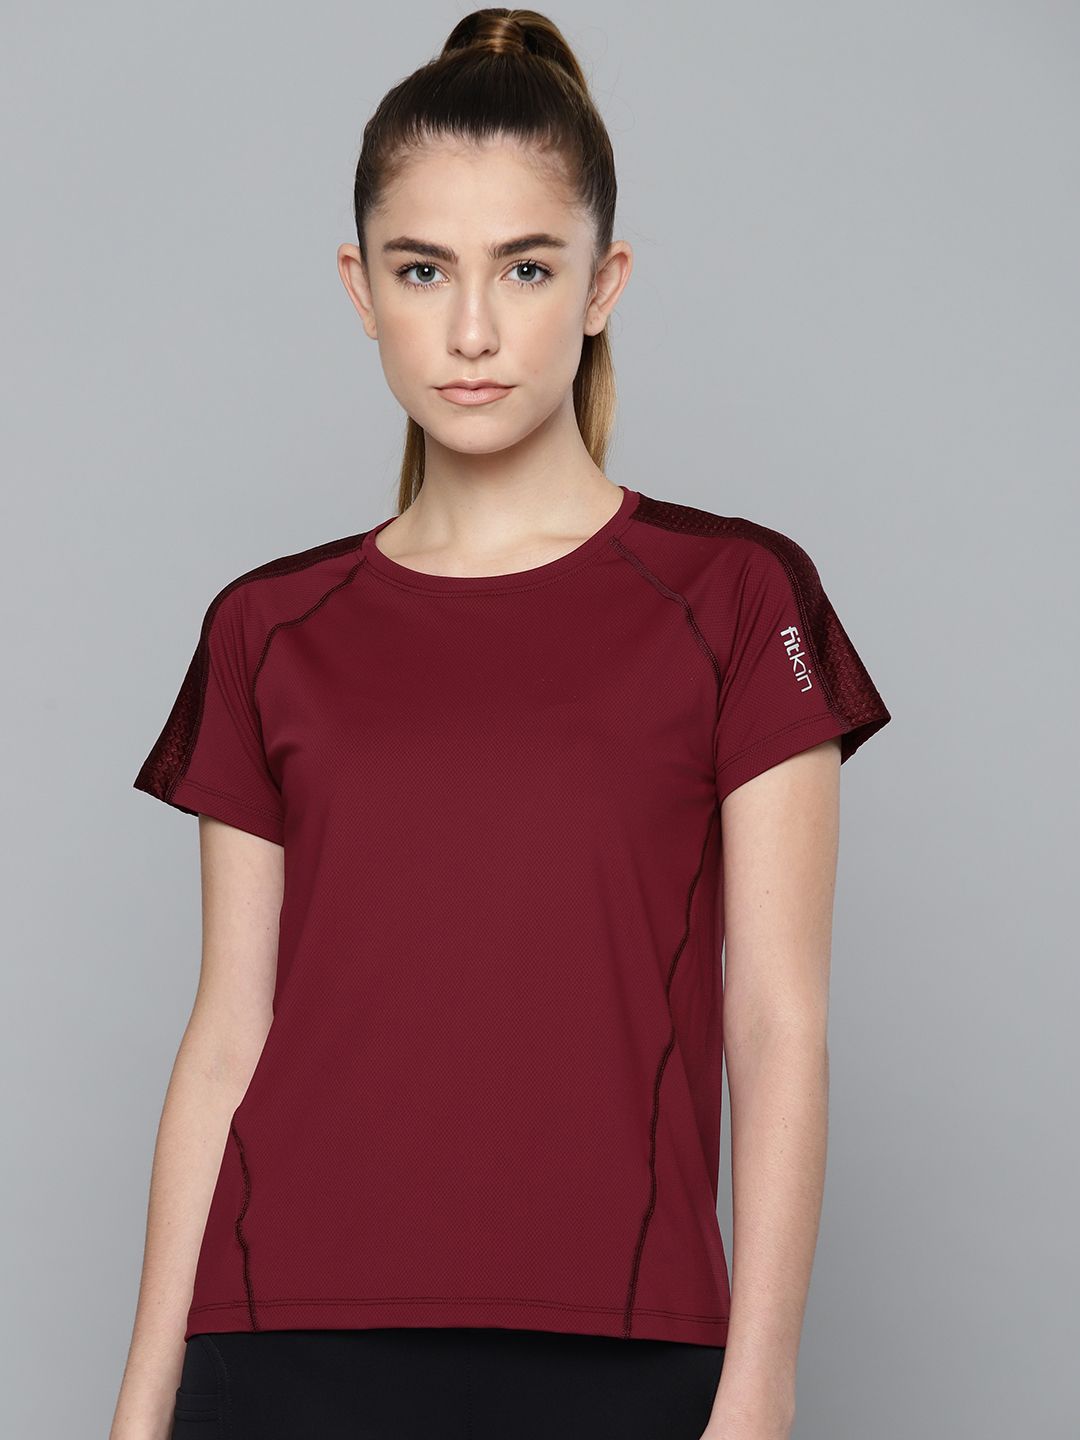 Fitkin Women Wine Coloured Training or Gym T-shirt With Design Sleeves Price in India